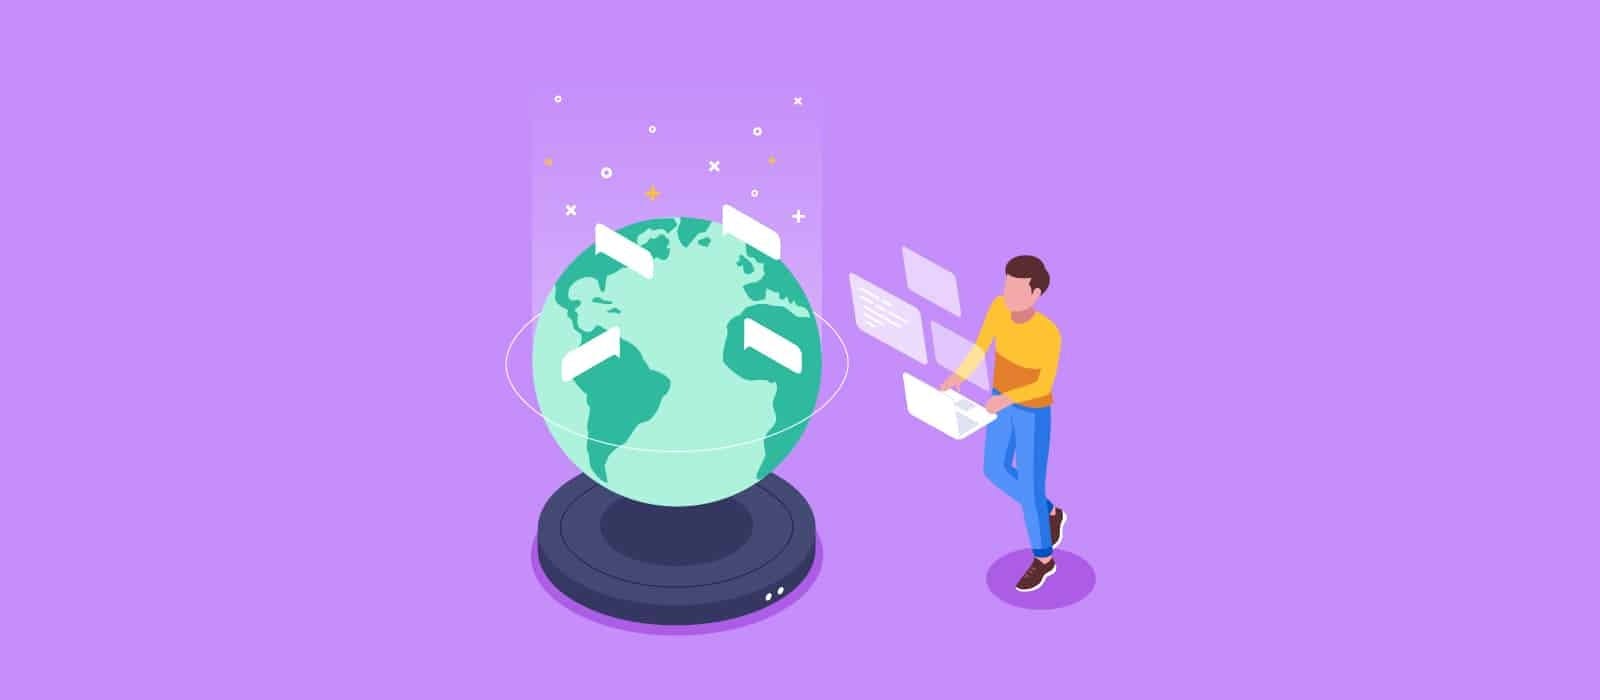 How product managers can help create connection in an isolated world 02